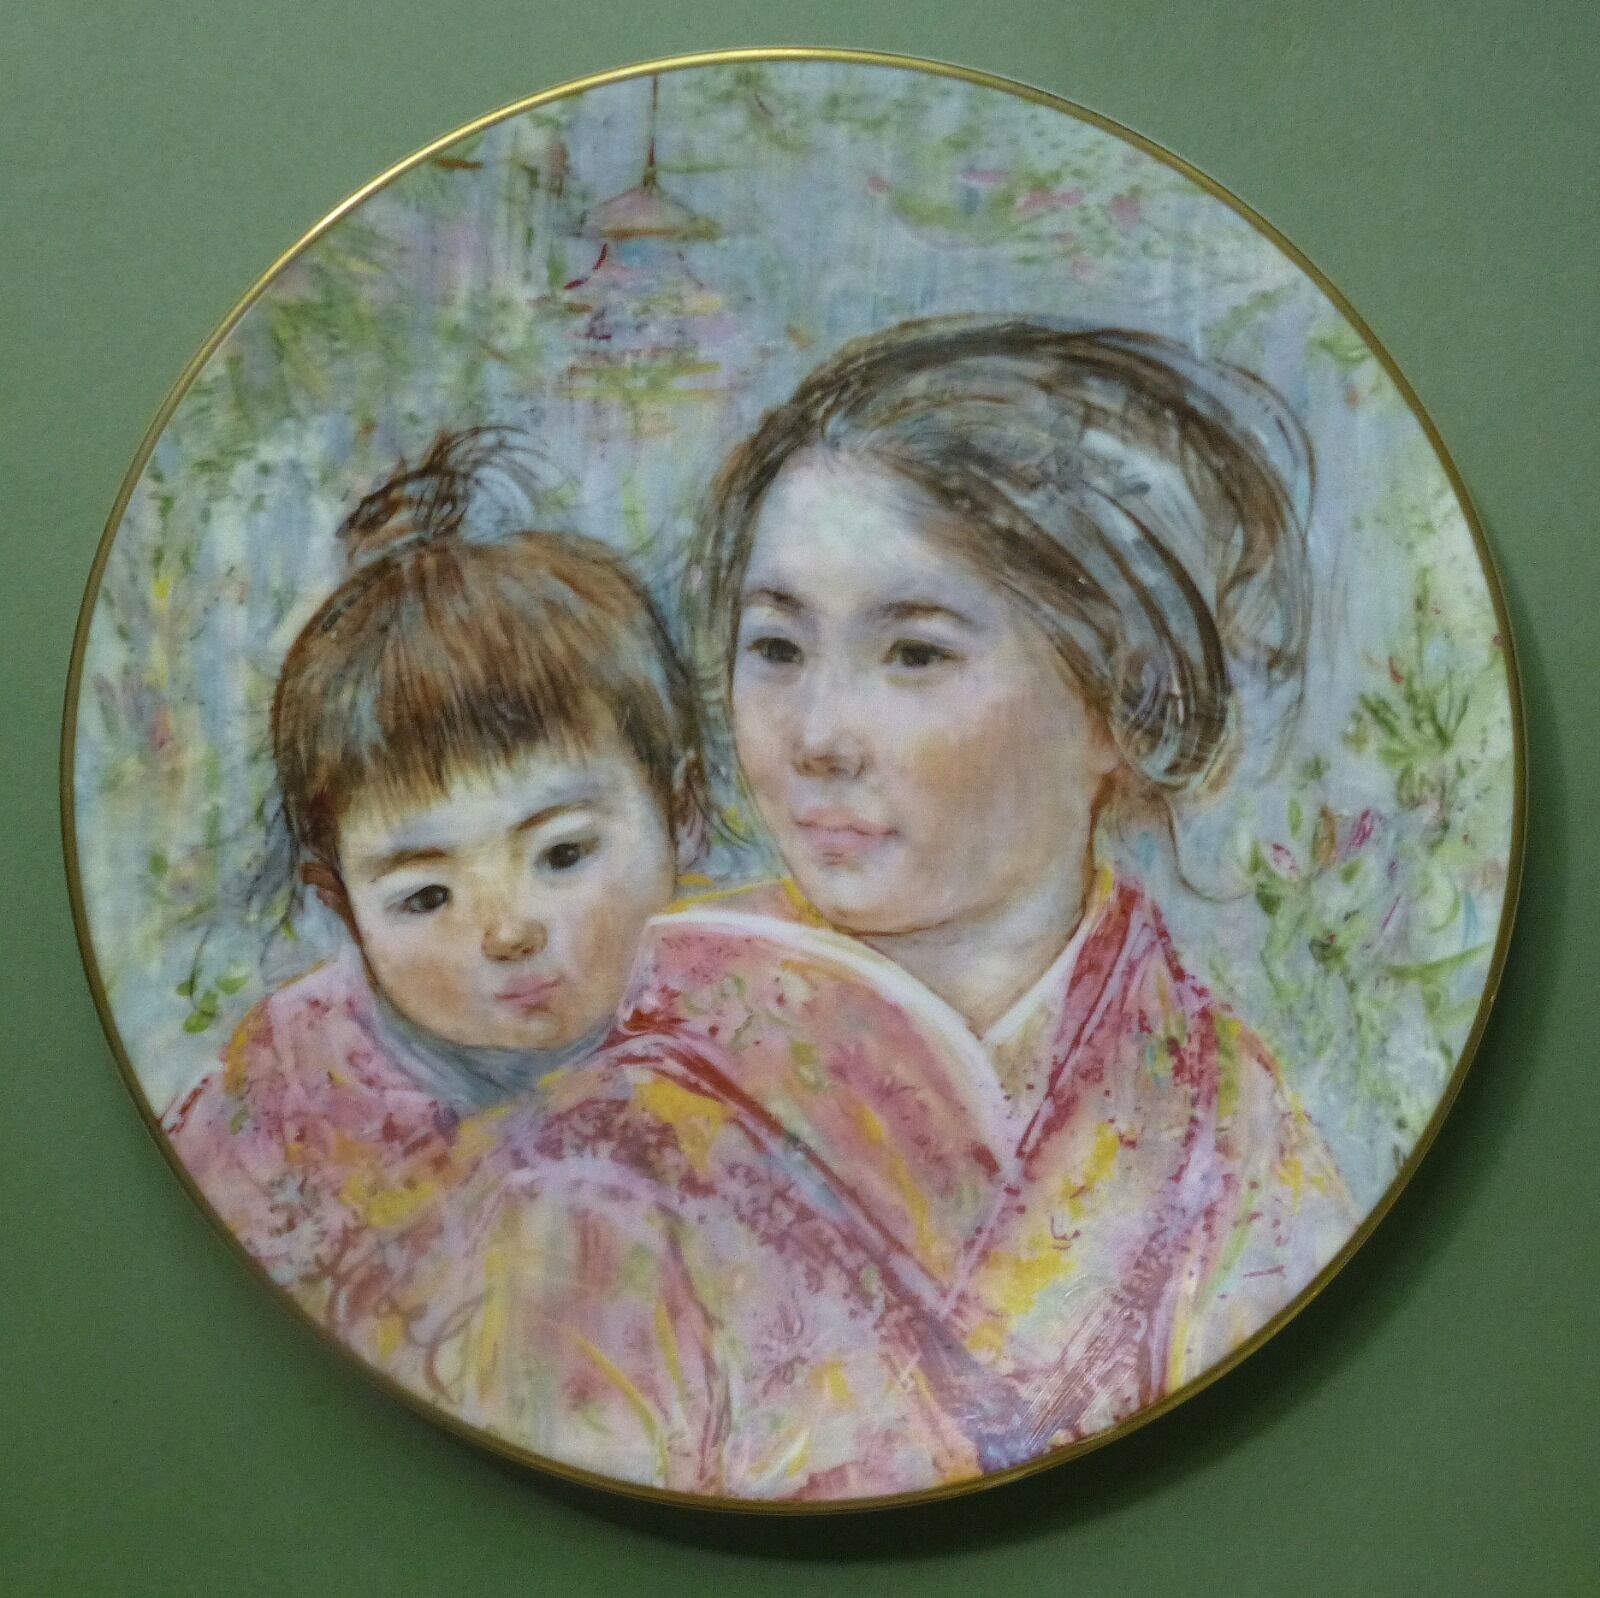 ROYAL DOULTON PLATE - SAYURI AND CHILD 1974 IN CUSTOM MADE CASE 